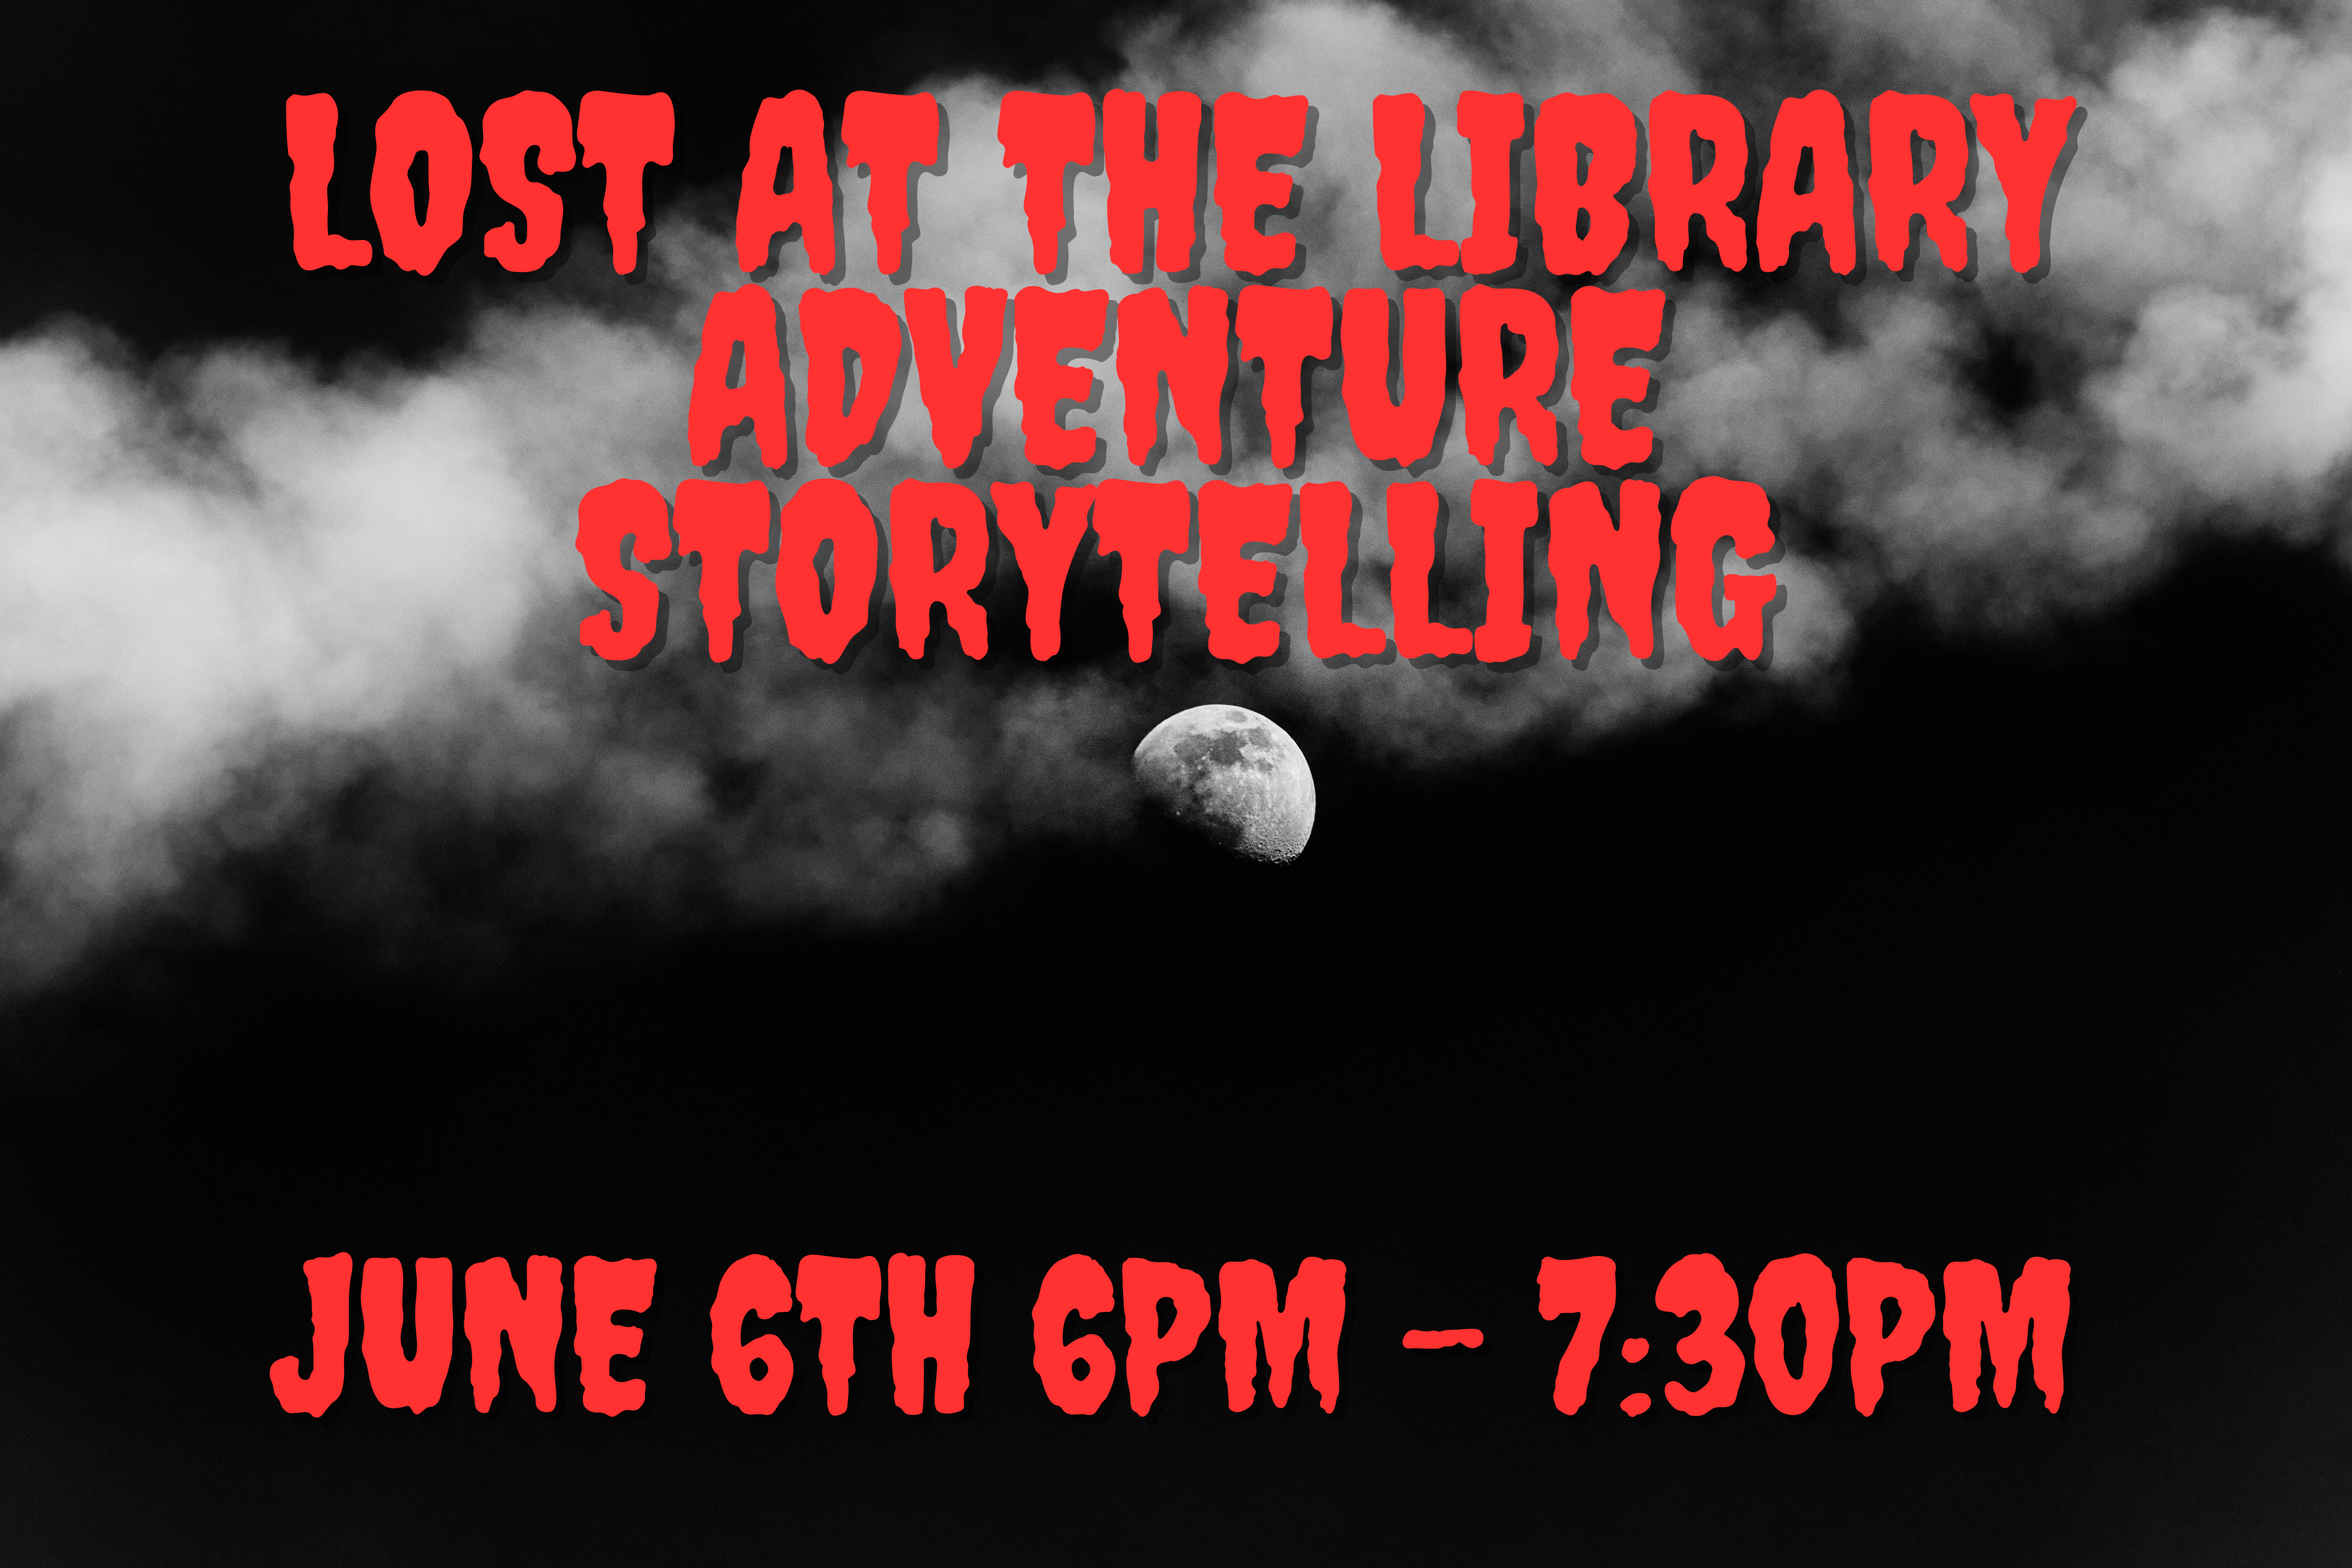 A foggy moonlight night with the words Lost and the Library Adventure Storytelling June 6th 6:00PM to 7:30PM